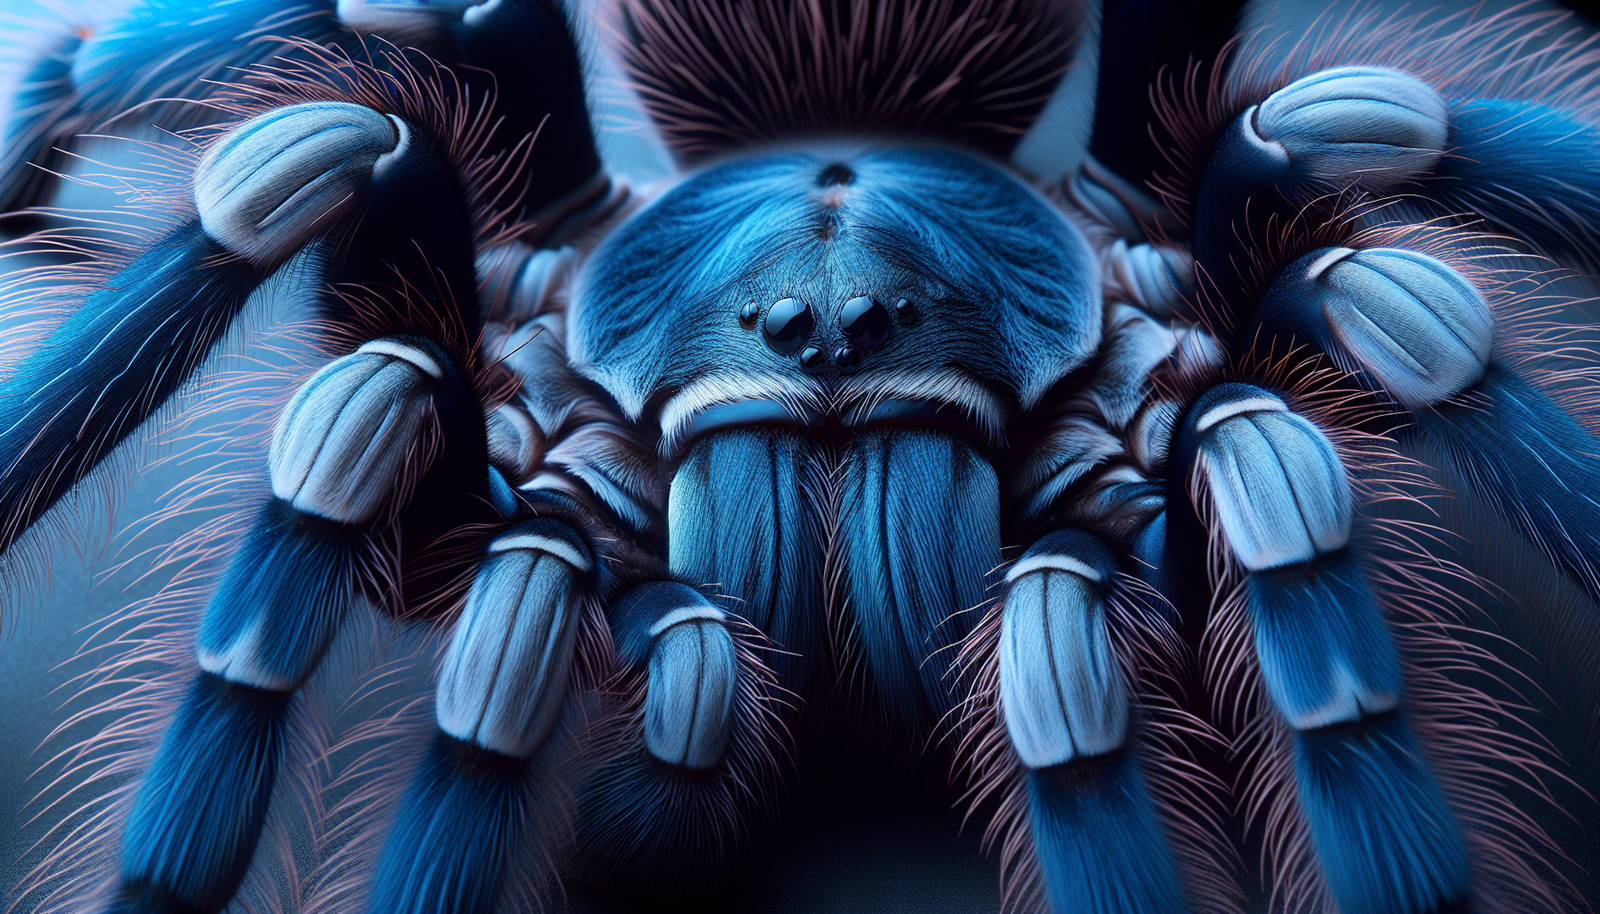 What Are The Challenges And Rewards Of Keeping The Enigmatic Cobalt Blue Tarantula As A Pet?